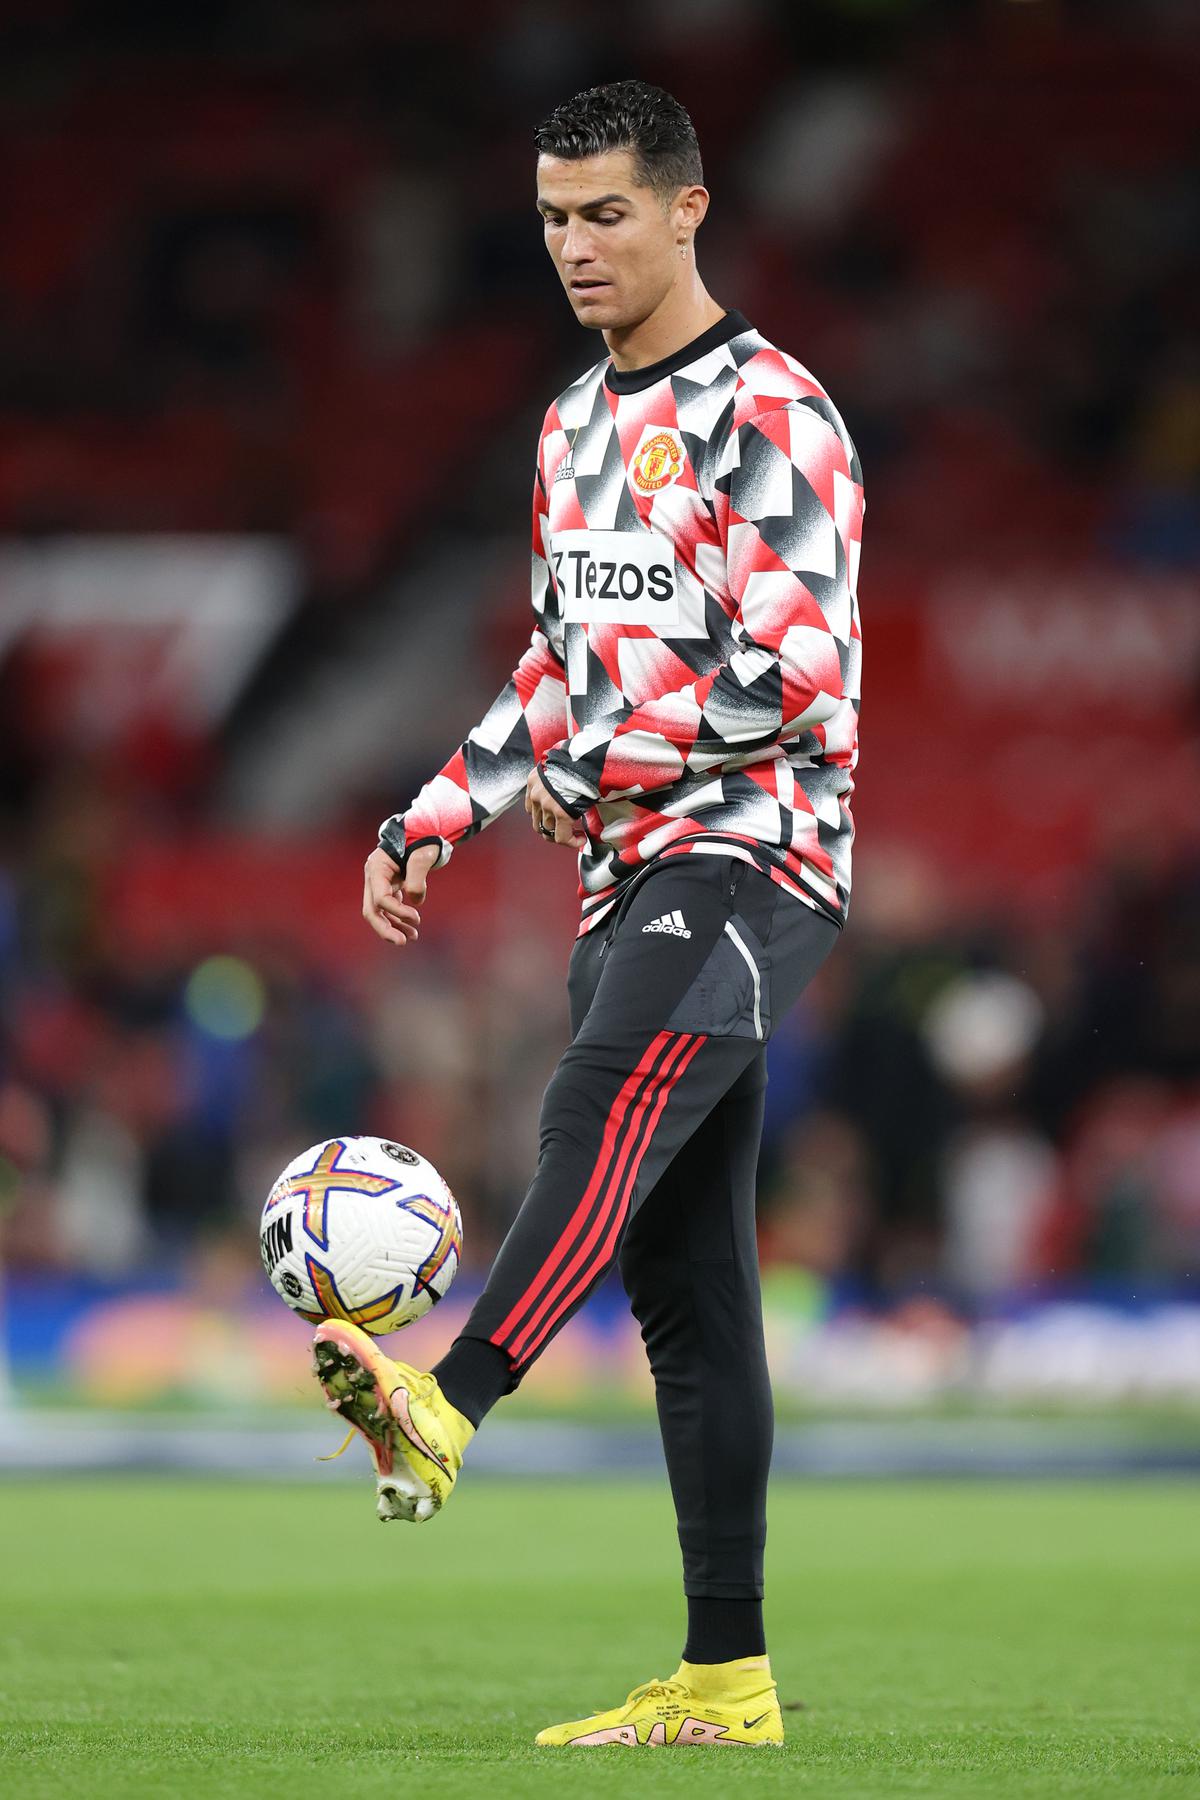 Cristiano Ronaldo of Manchester United warms up prior to the Premier League match against Tottenham Hotspur at Old Trafford